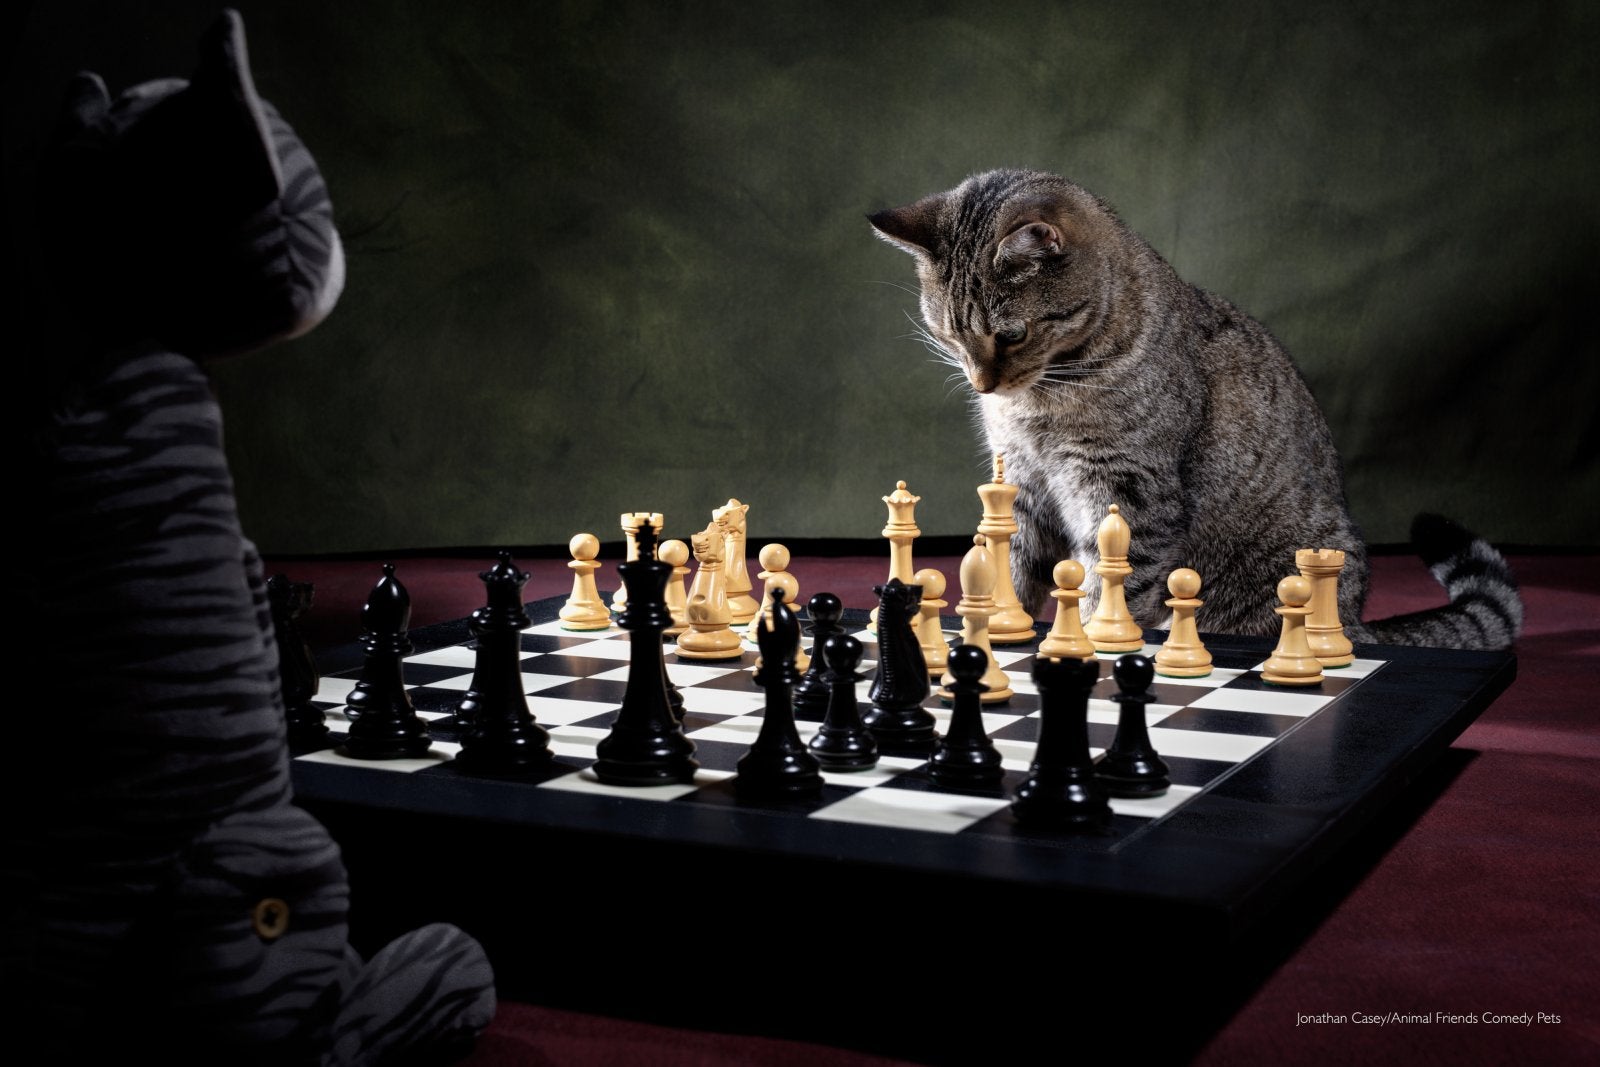 cats playing chess comedy pet photo awards